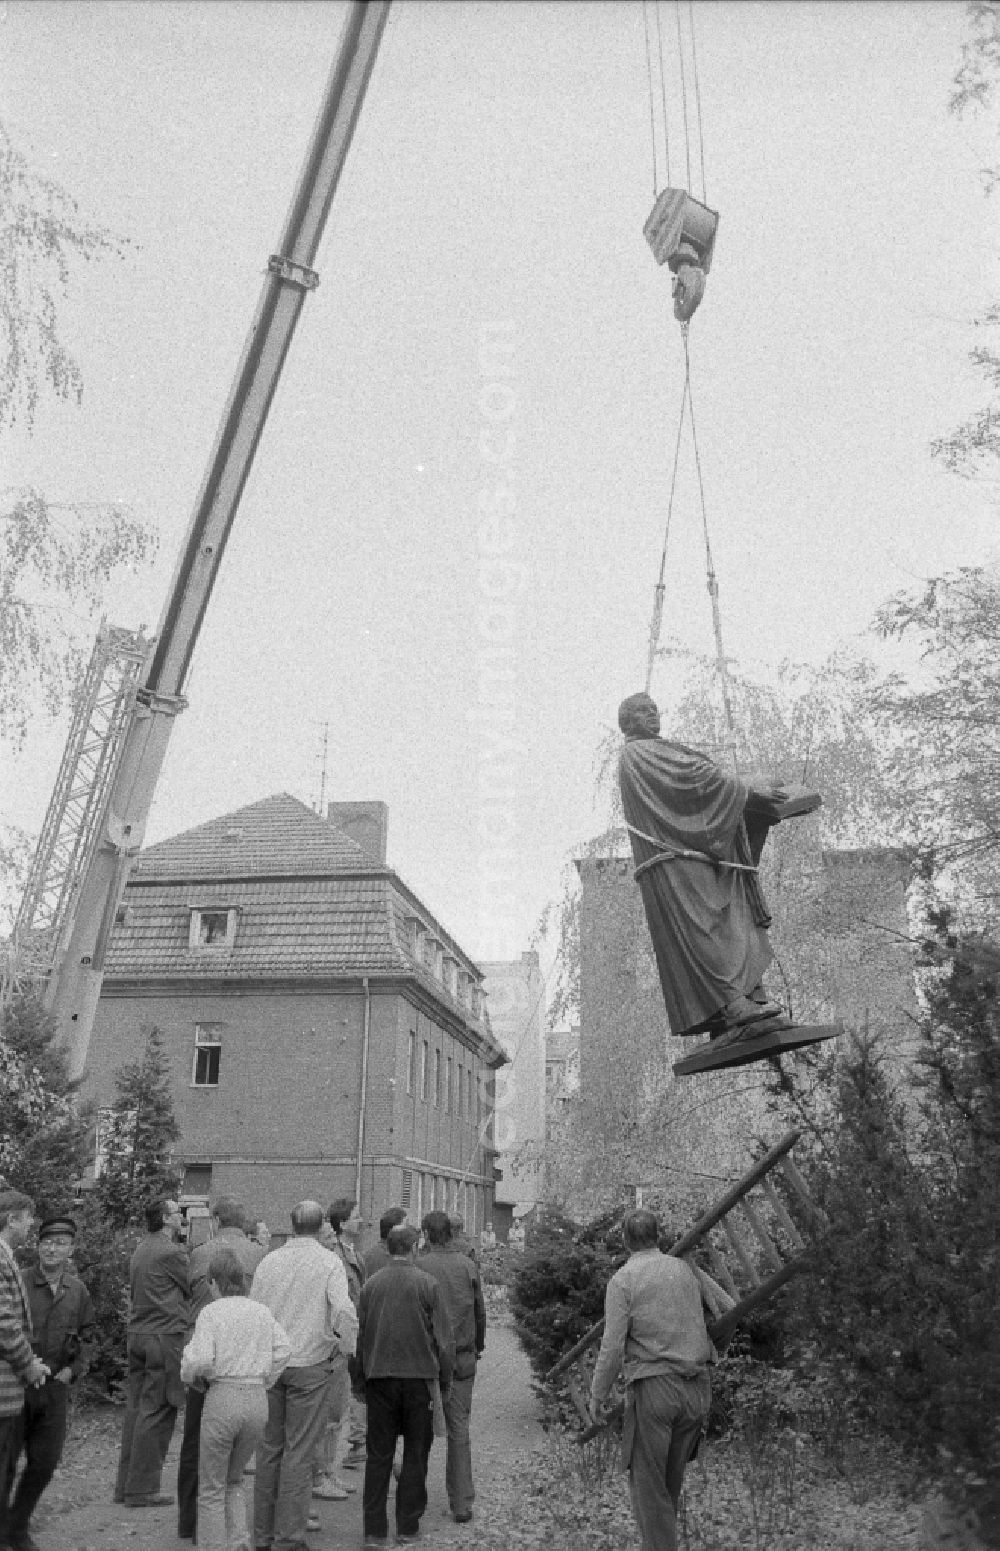 GDR picture archive: Berlin - Sculpture of the Martin Luther Monument during the re-erection on Karl-Liebknecht-Strasse in the Mitte district of East Berlin in the area of the former GDR, German Democratic Republic